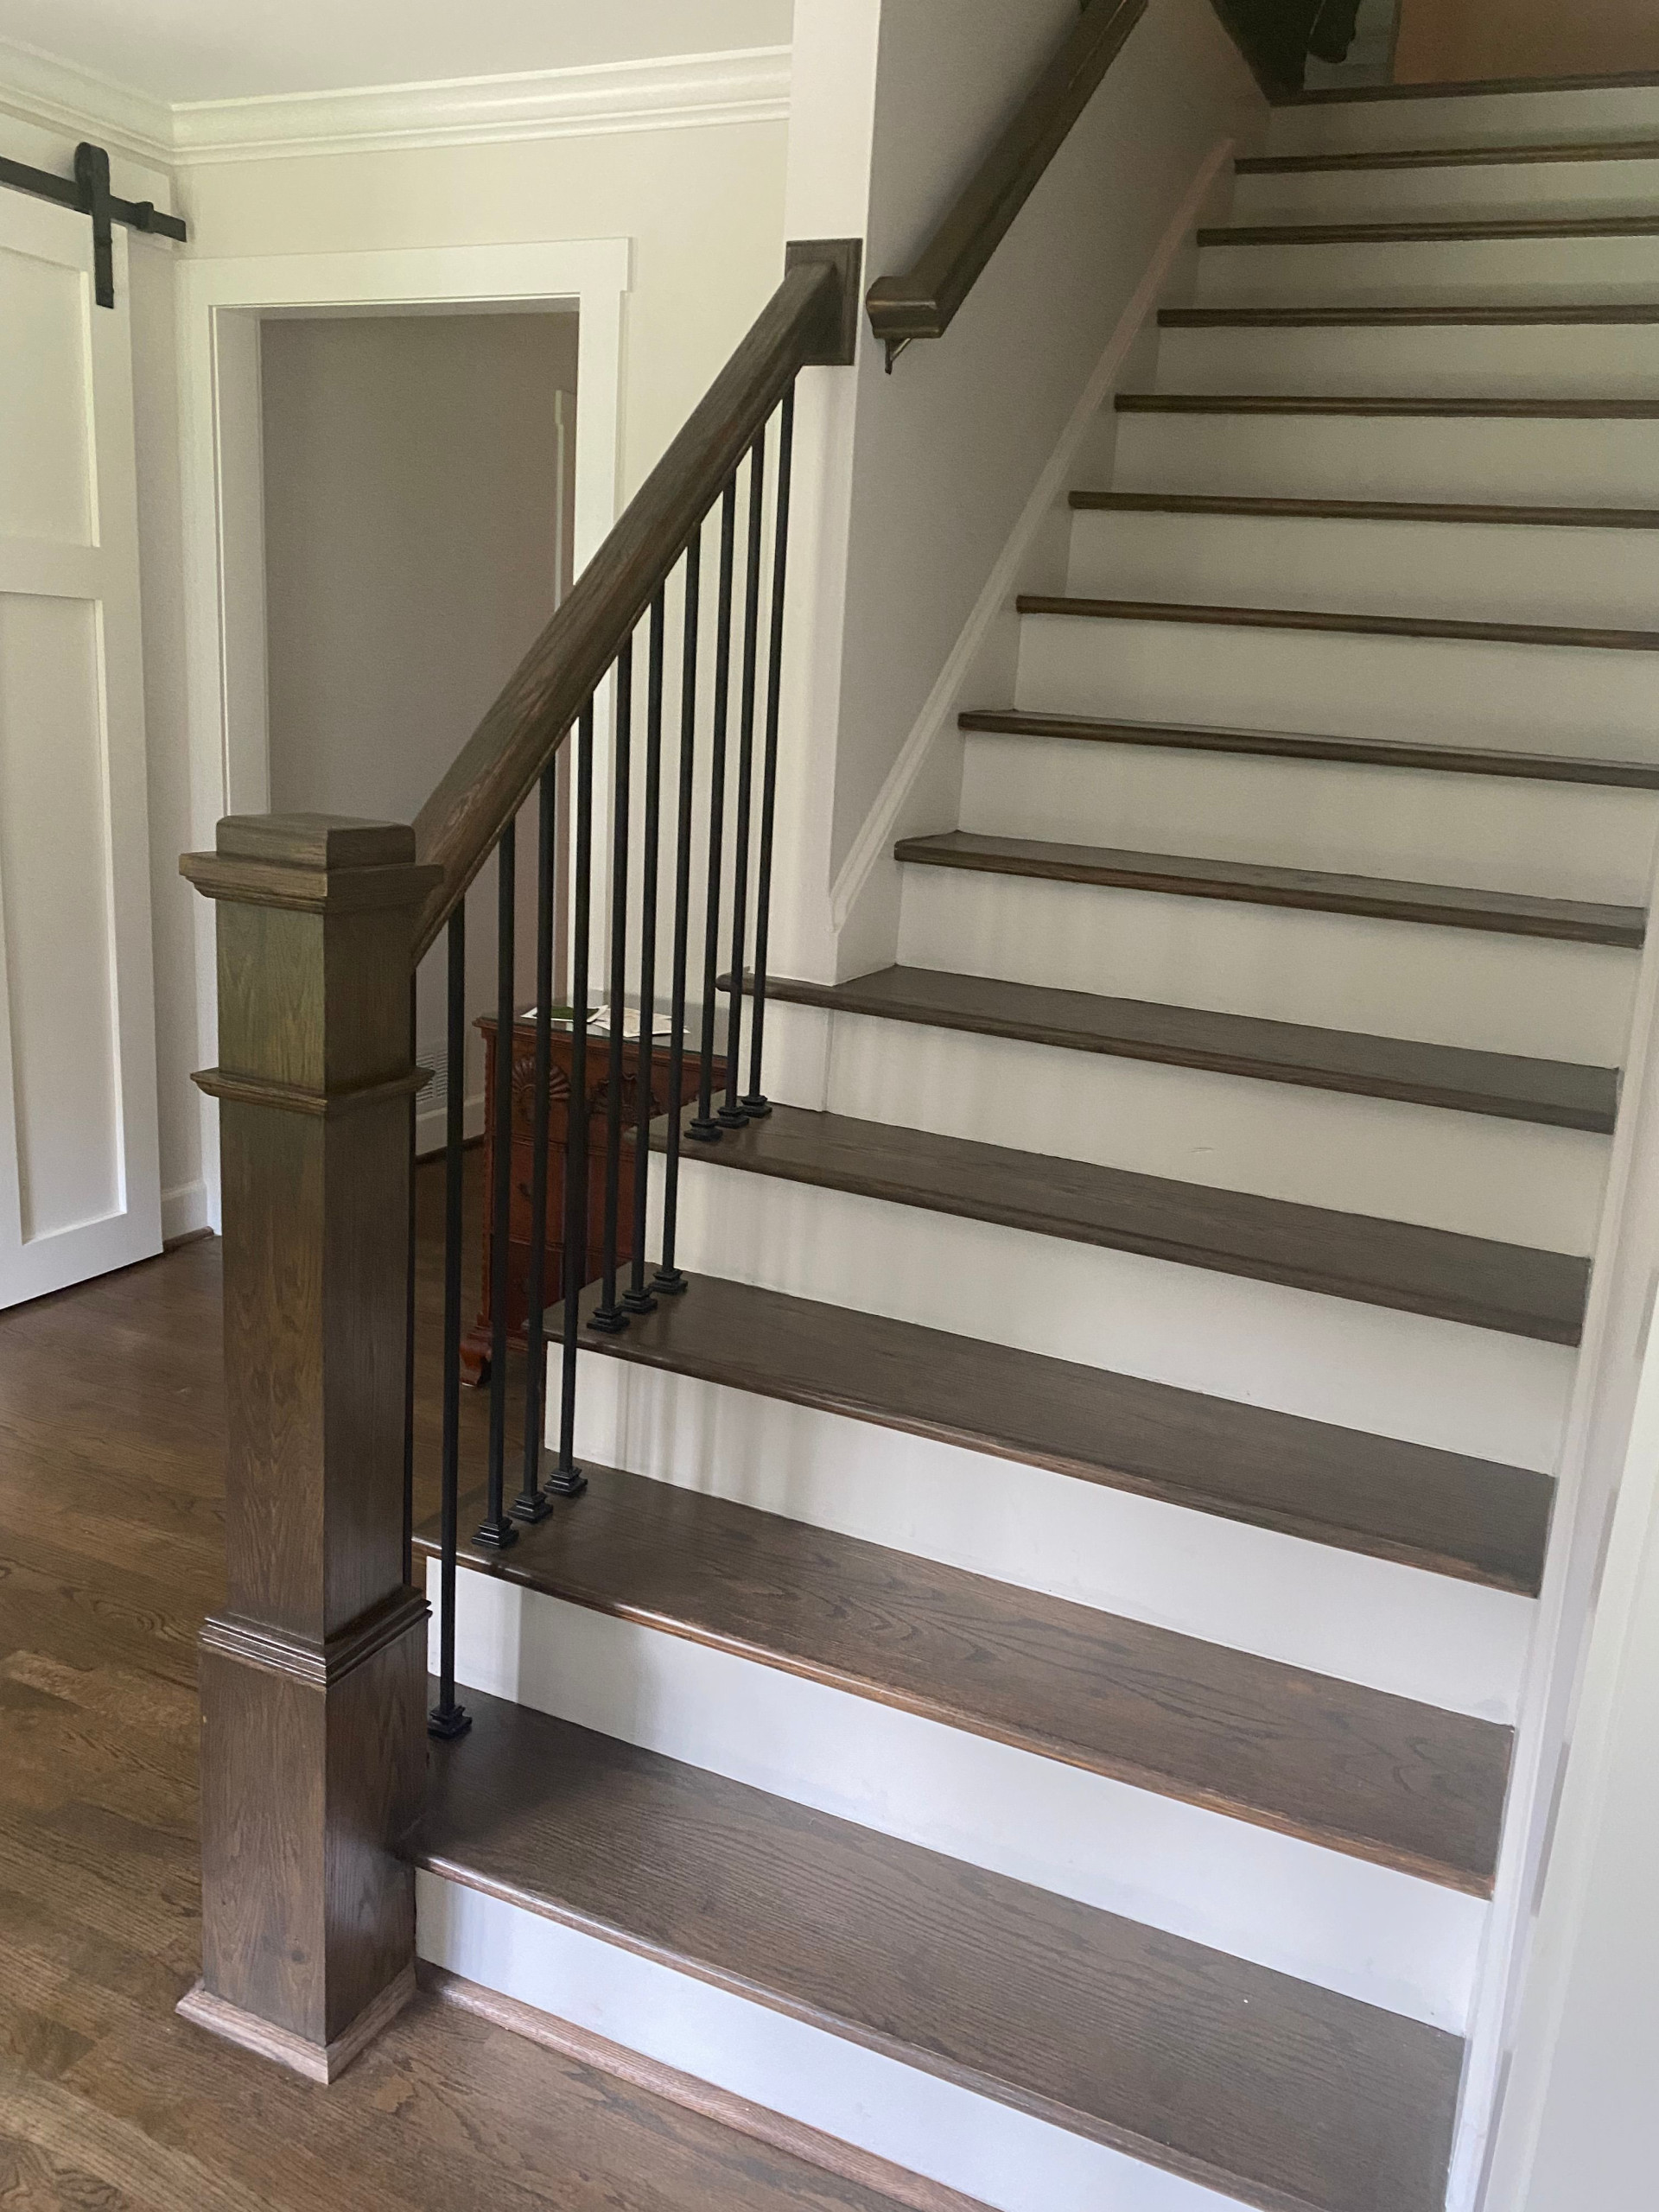 New stair baluster